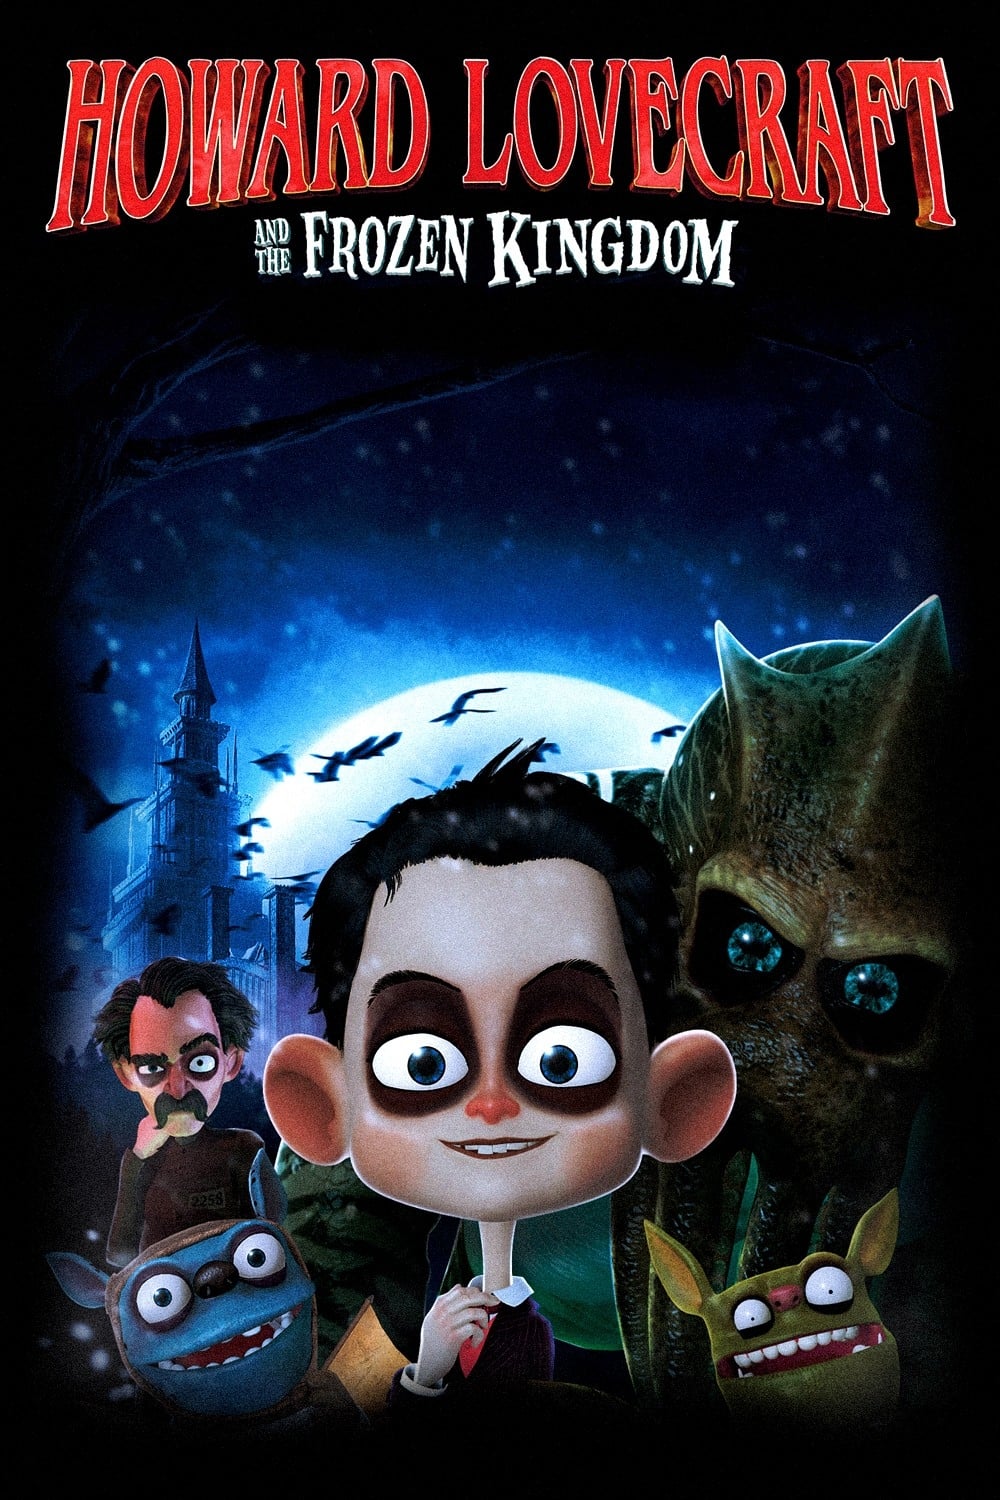 Poster for the movie "Howard Lovecraft & the Frozen Kingdom"